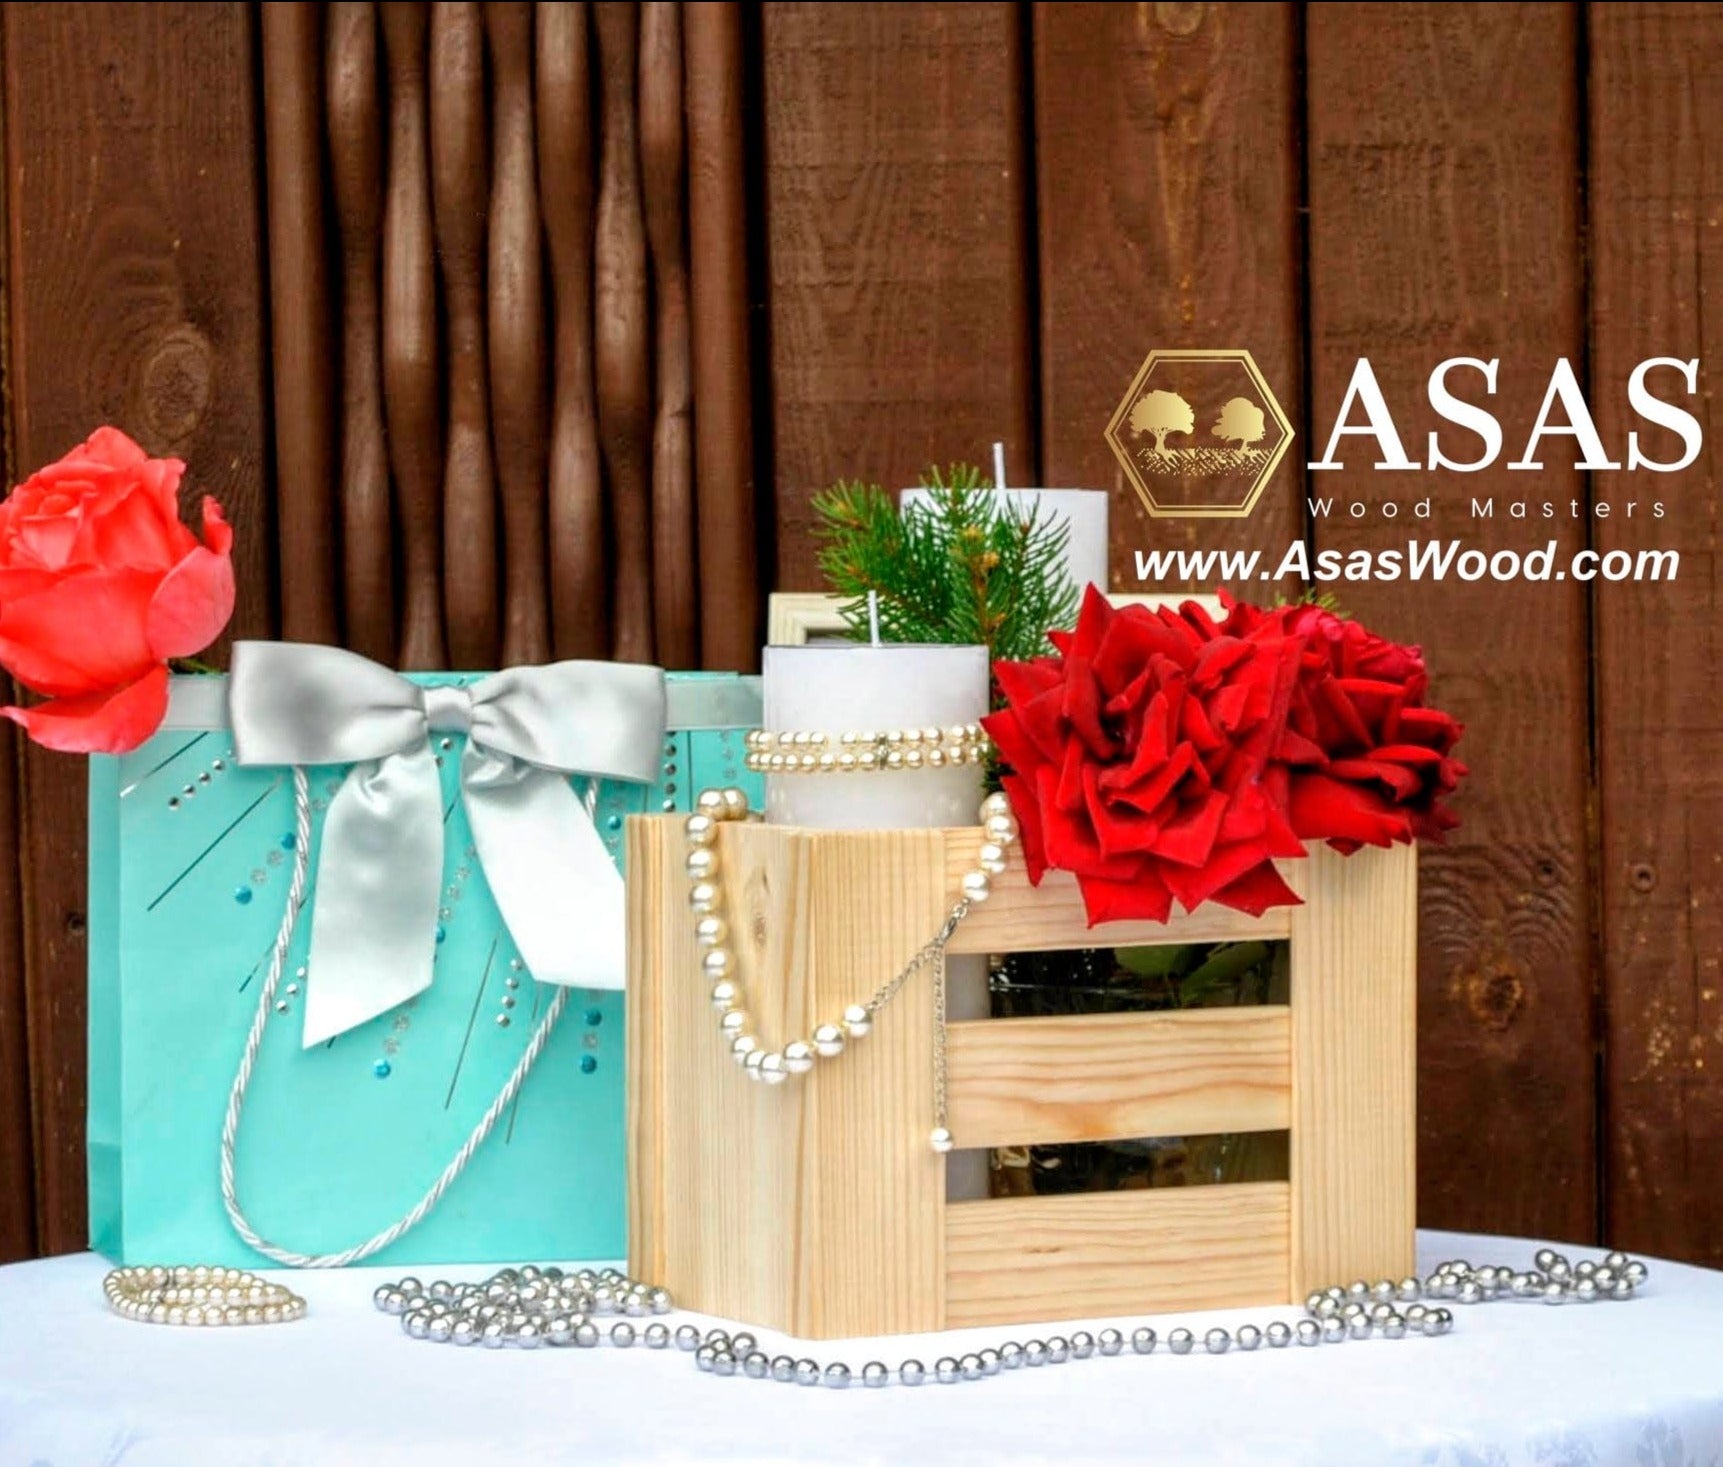 Cute wooden box, home decor, made by asaswood